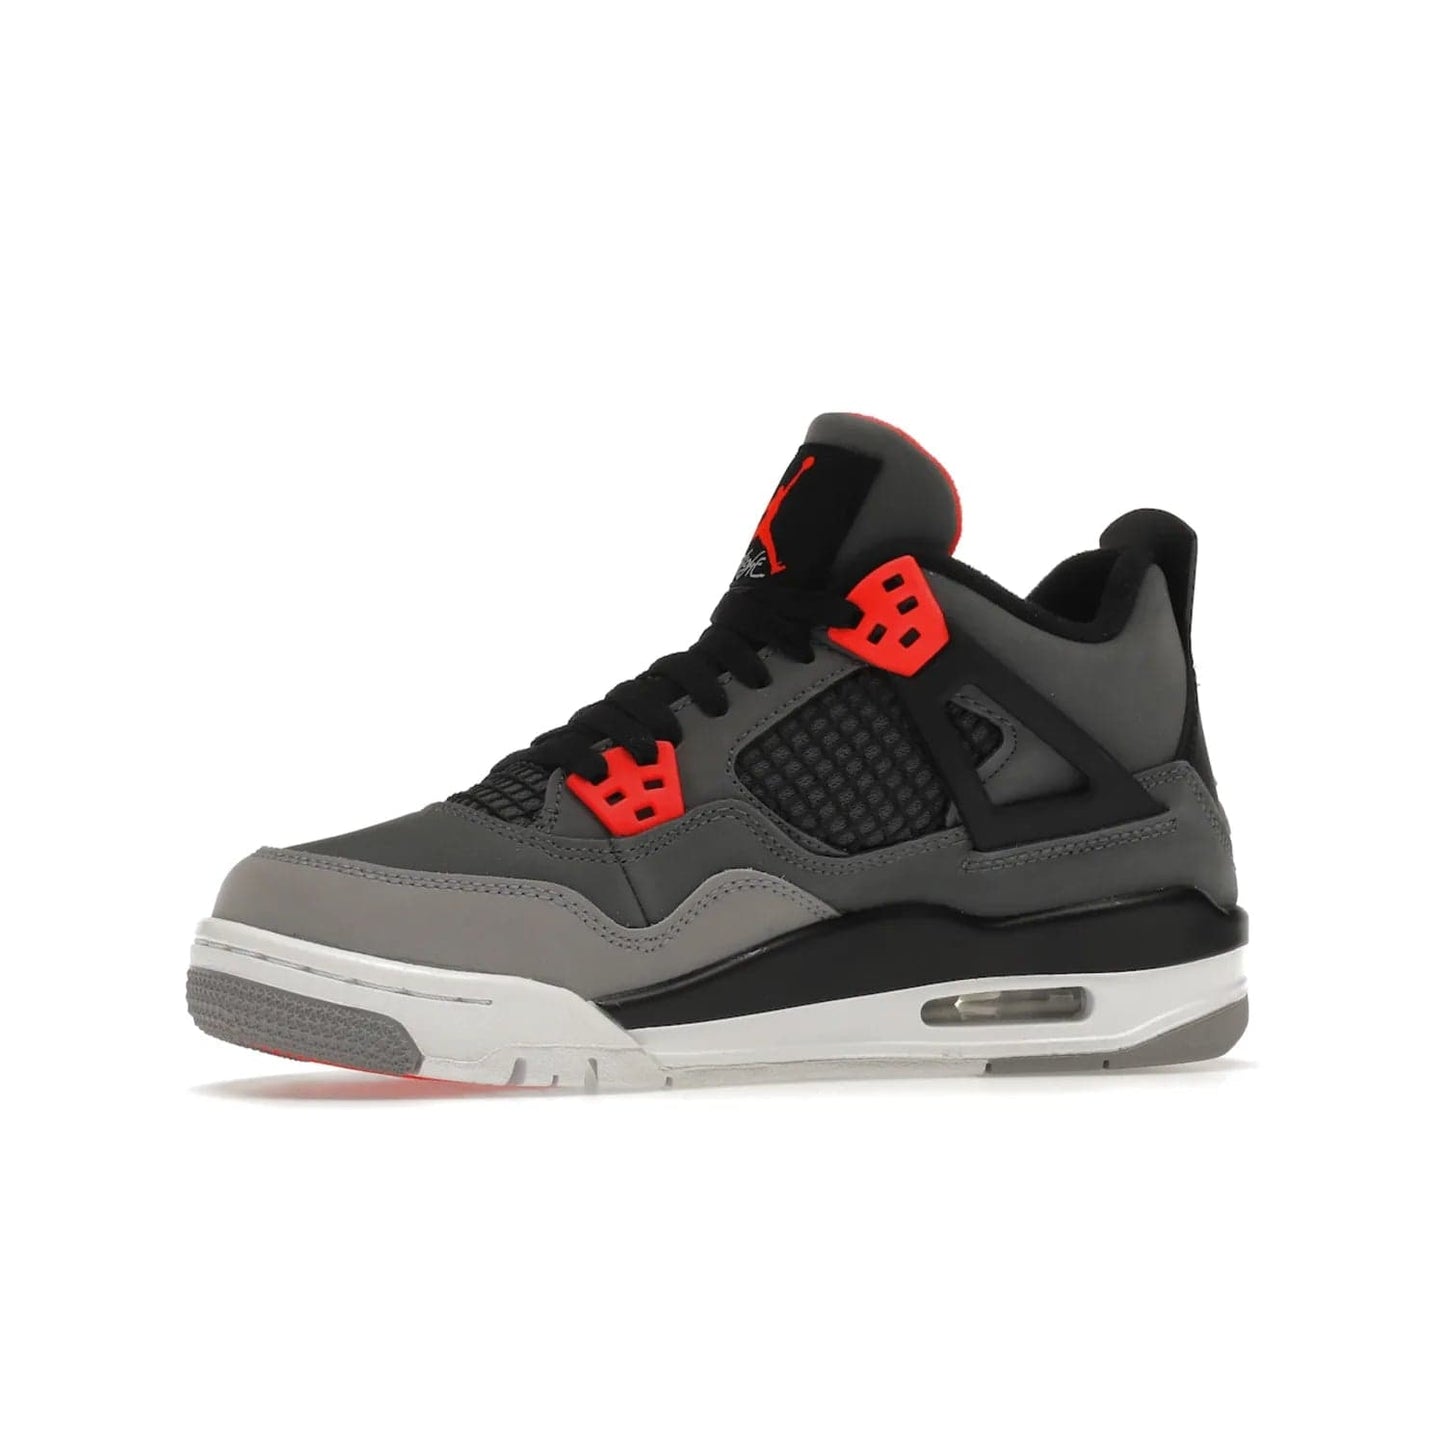 Jordan 4 Retro Infrared (GS) - Image 17 - Only at www.BallersClubKickz.com - Shop the Air Jordan 4 Retro Infrared (GS) for a classic silhouette with subtle yet bold features. Dark grey nubuck upper with lighter forefoot overlay, black accents, Infrared molded eyelets & woven tongue tag. Available June 2022.